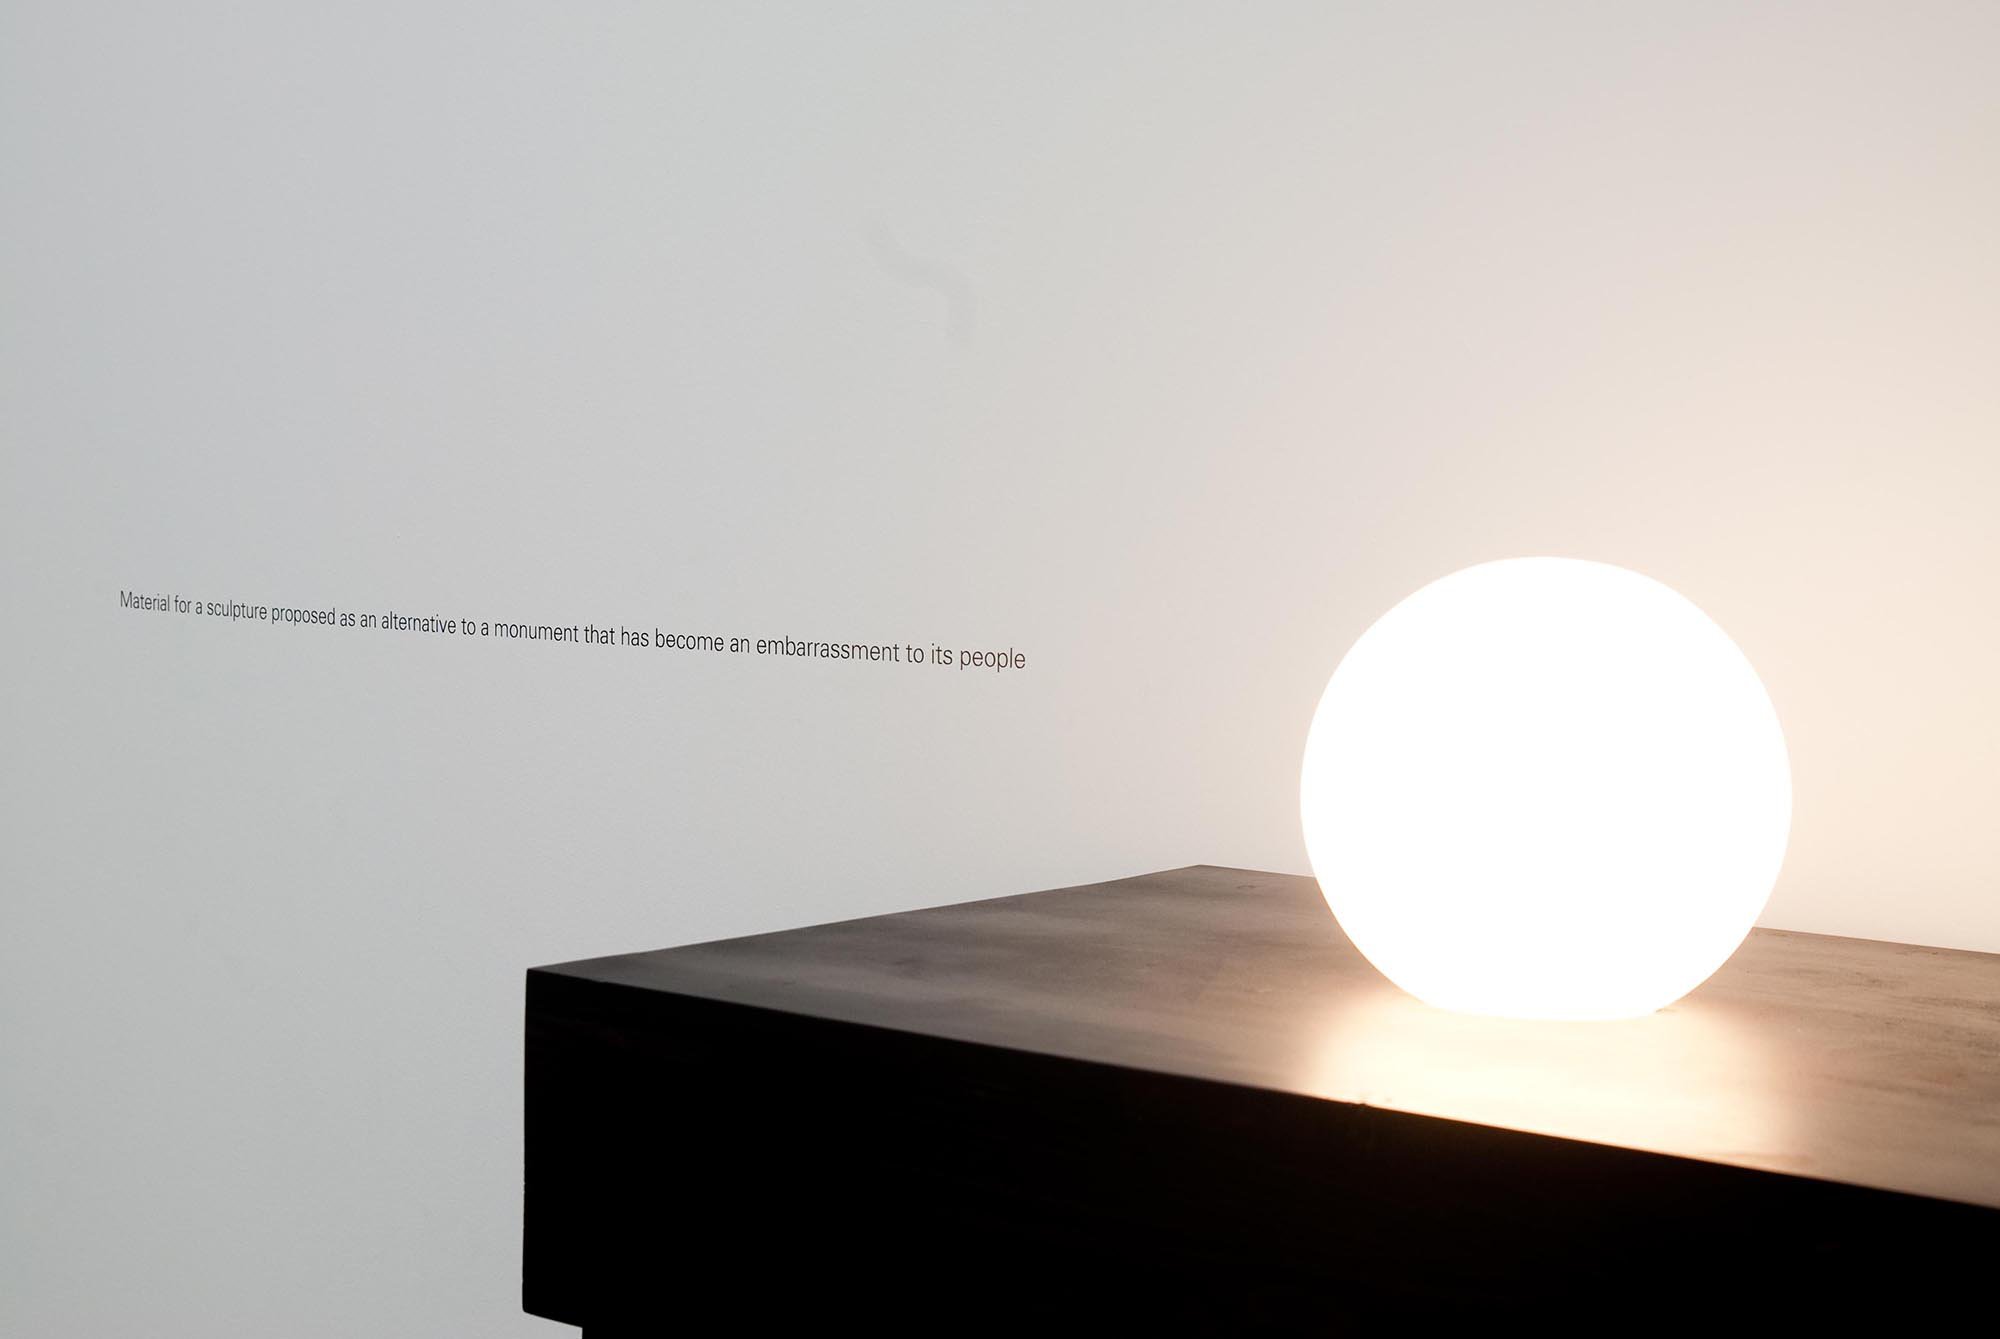 Iman Issa, Material for a sculpture presented as an alternative to a monument that has become an embarrassment to its people, detail, 2 light bulbs, dark walnut plywood table, 150 x 50 x 120 cm, light bulbs are synced in a loop, one lights up while the other slowly fades, 64 points vinyl writing, 2010. Installation view, Material, Rodeo, Istanbul, 2011